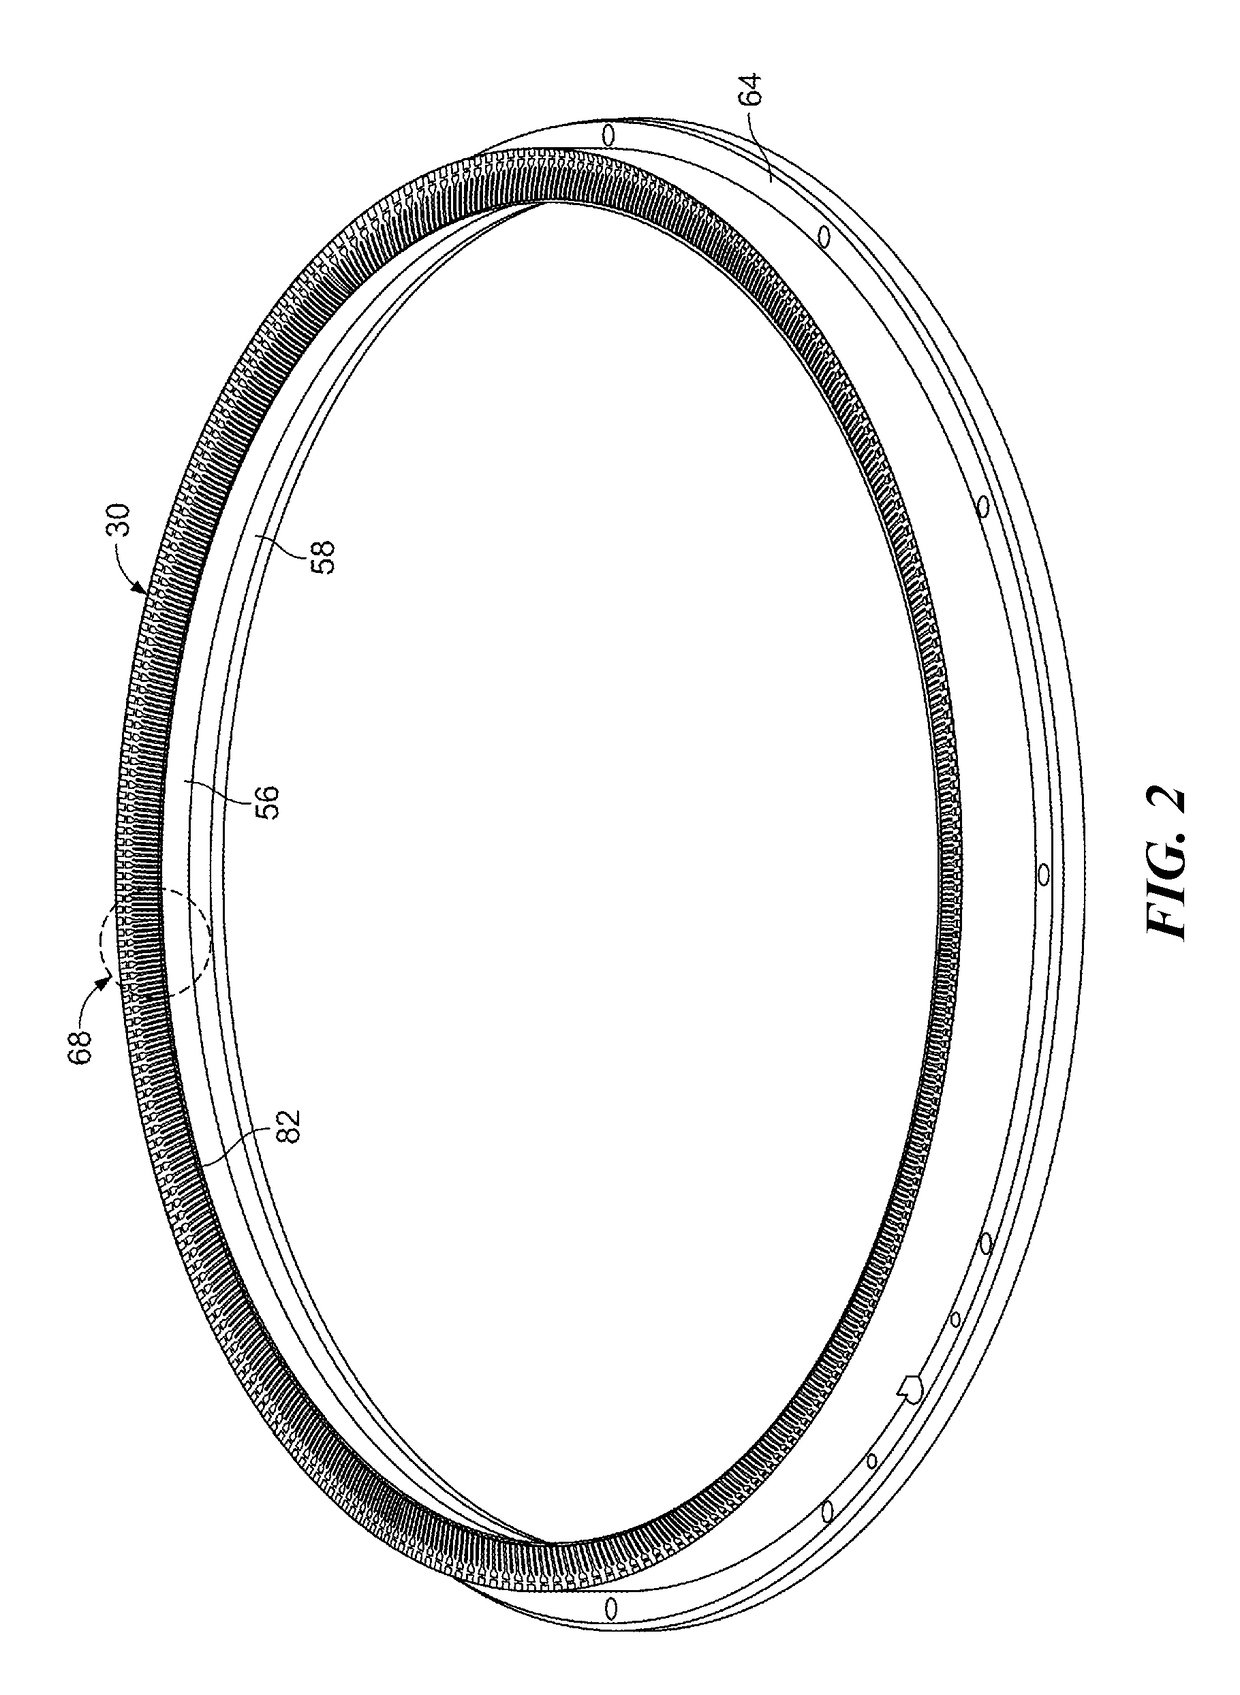 Electroplating contact ring with radially offset contact fingers